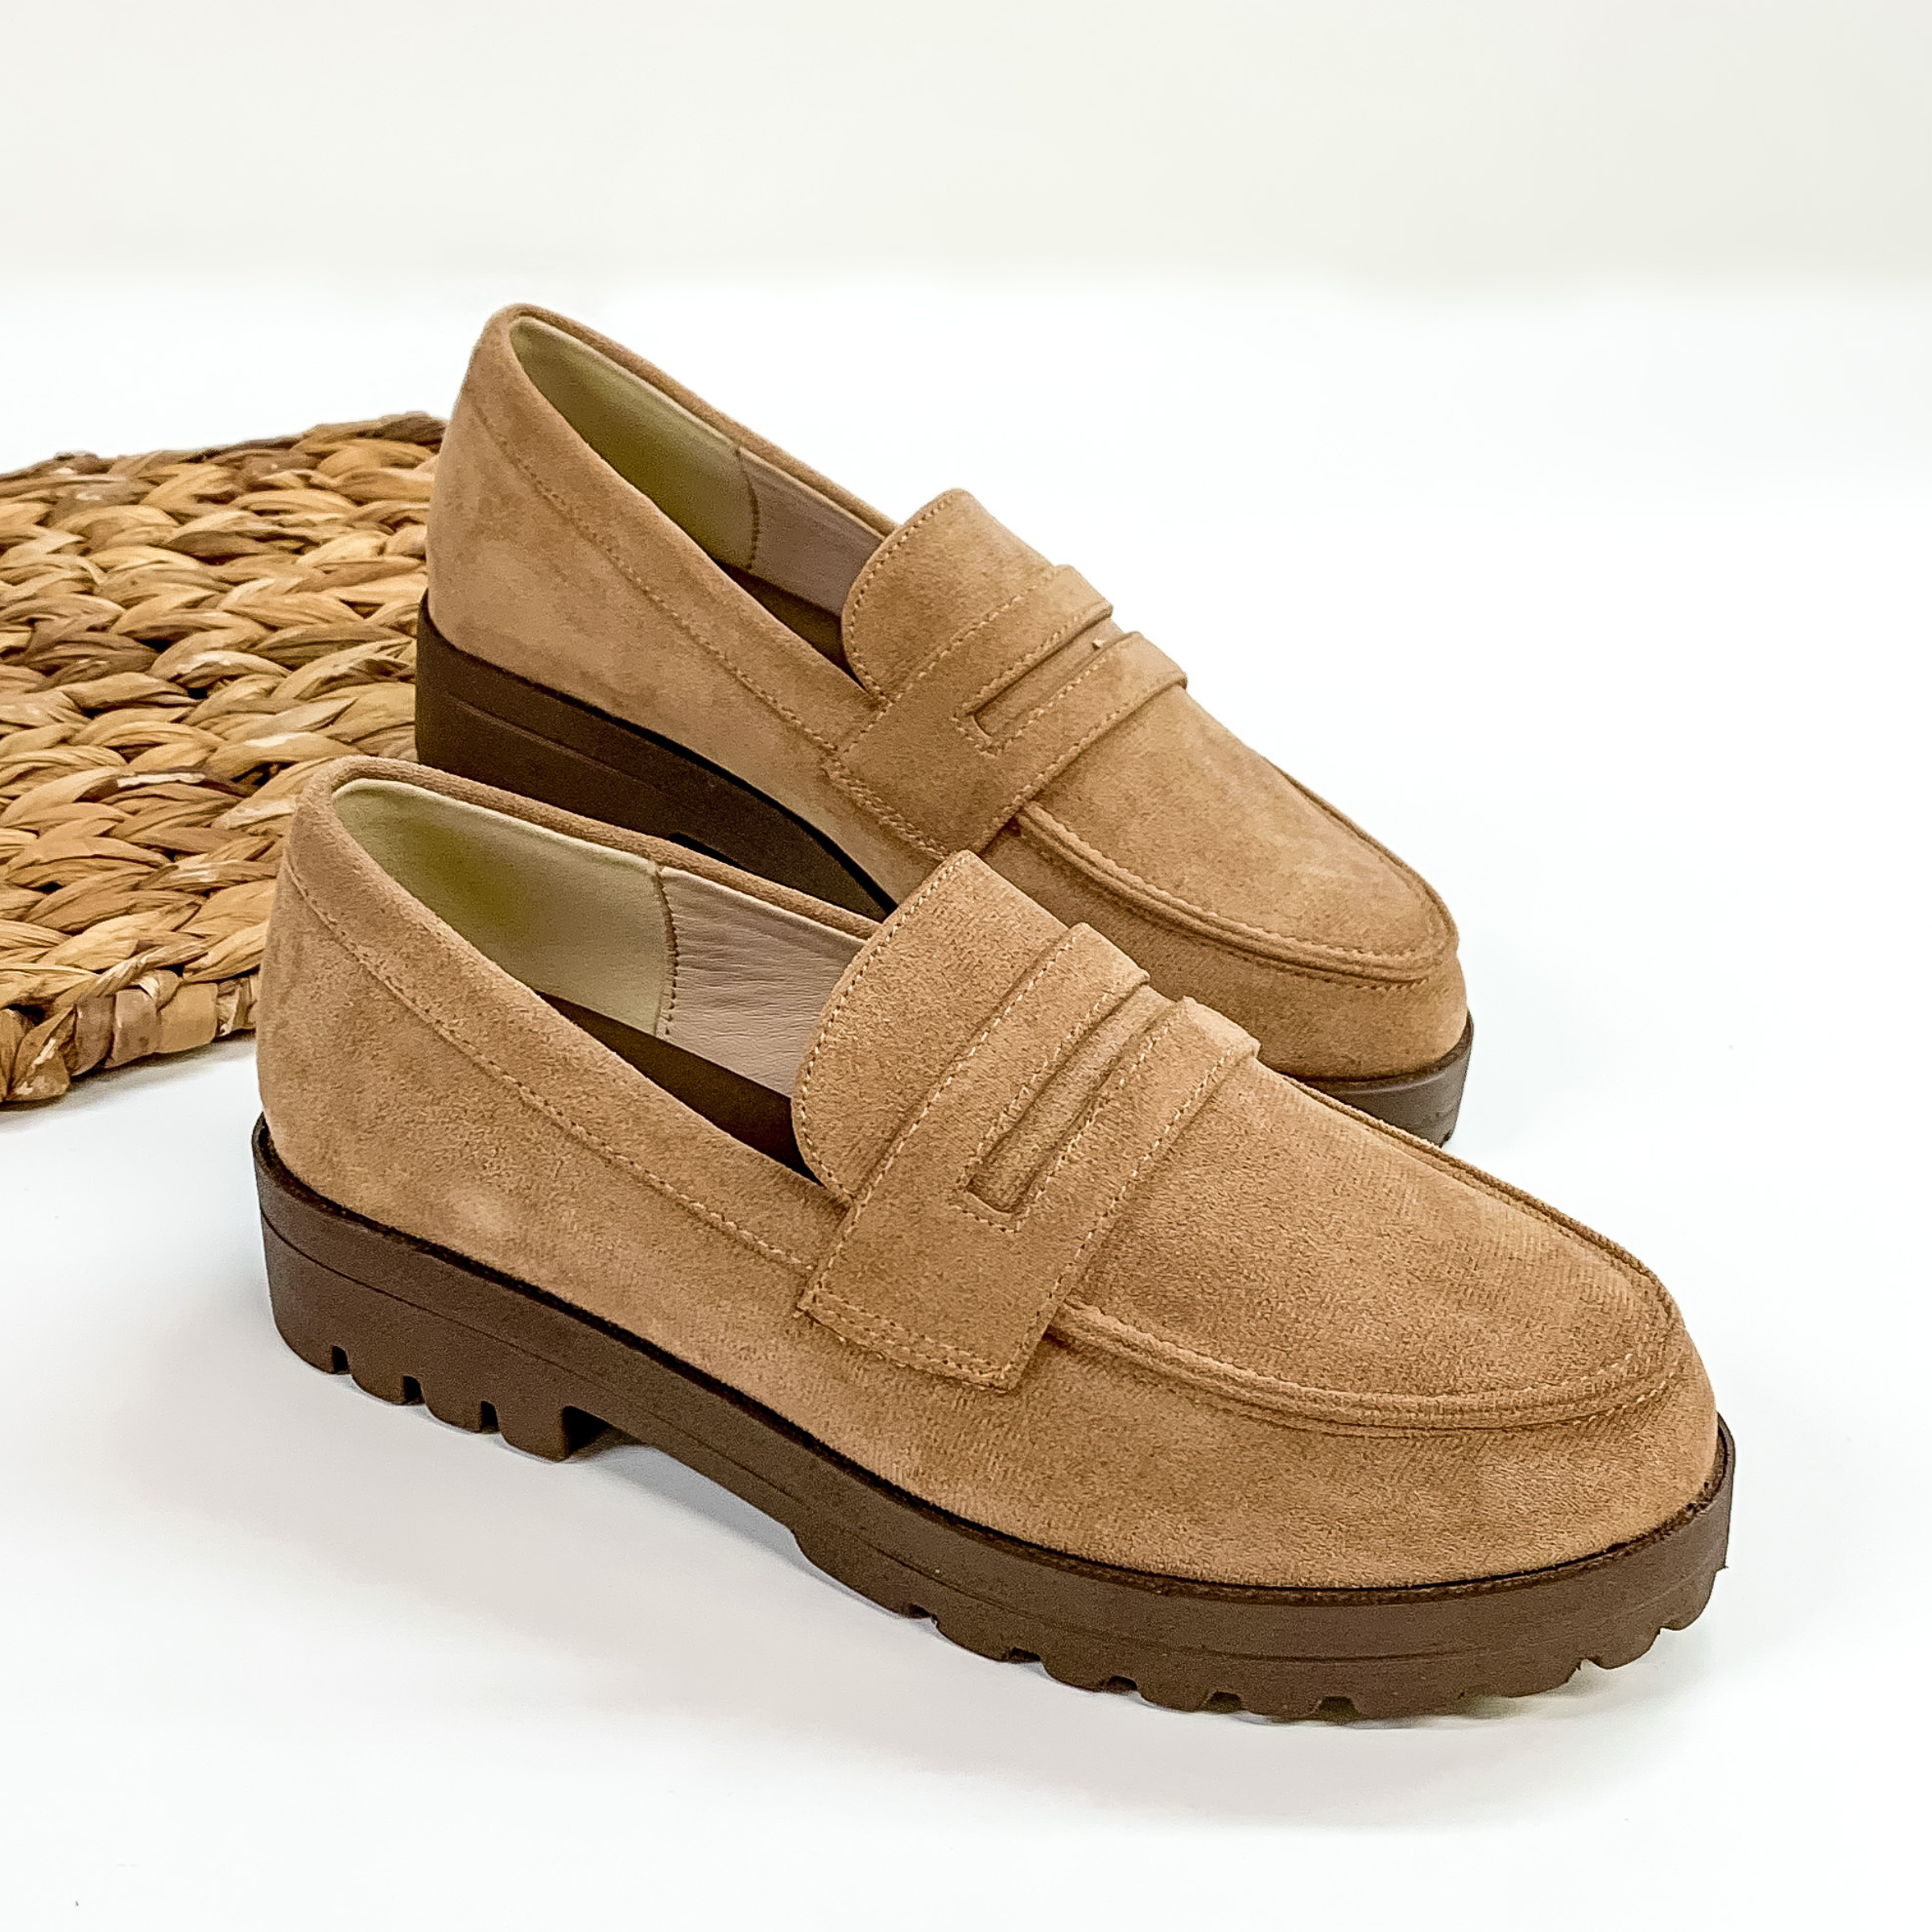 Tan suede slip on loafers with a brown rubber sole. These loafers are pictured laying  on a white background. 